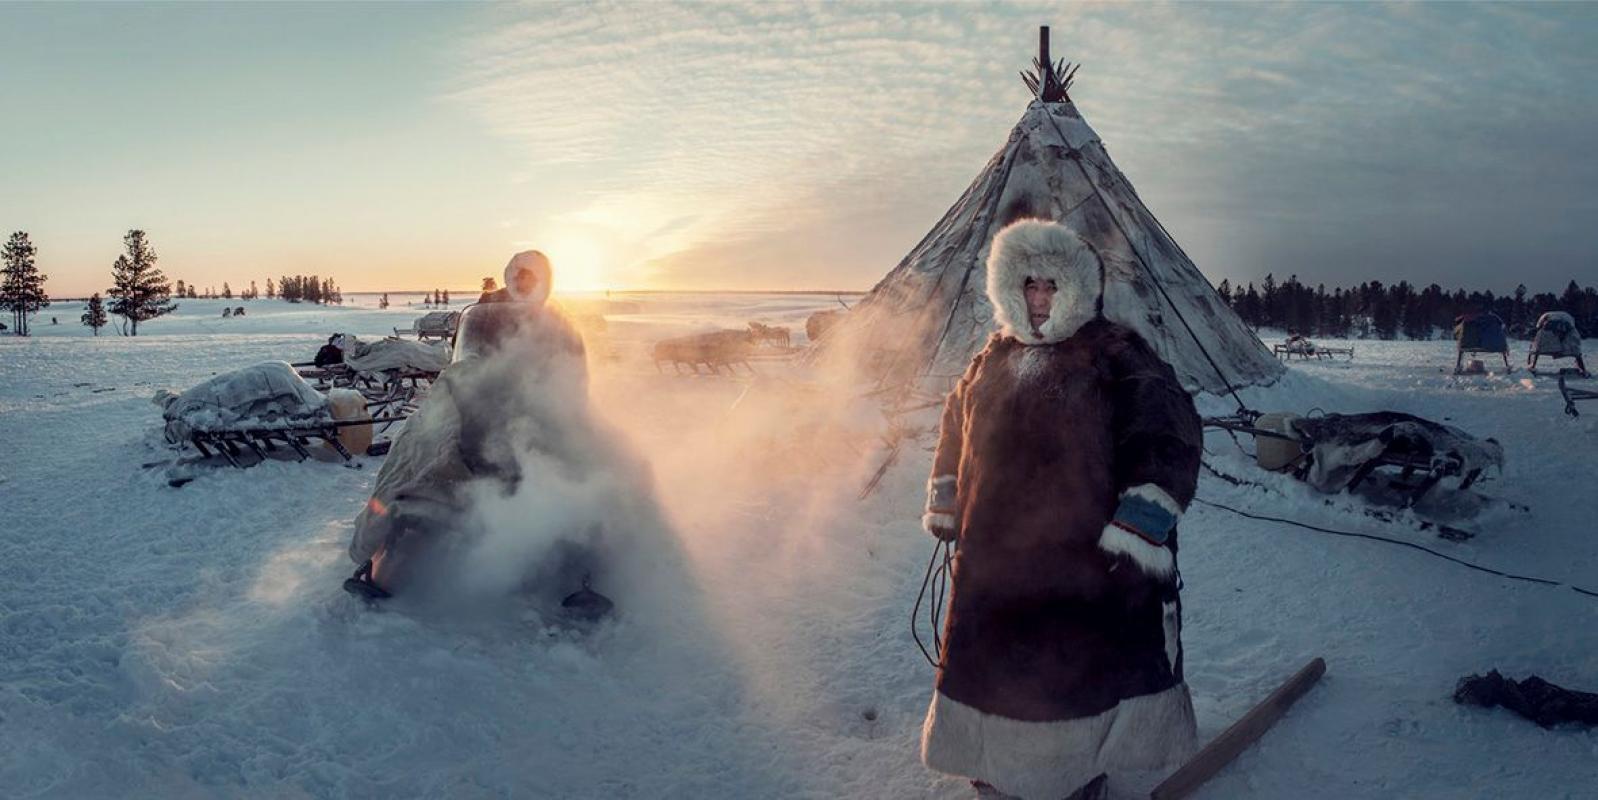 XXXIX 2, Pavel & Jello Khudi, Yamalo-Nenets Autonomous district, Siberia 2018

It seems implausible that people could survive the extreme blizzards, sunless days and excruciatingly low temperatures that the winter brings to this vast, icy region of